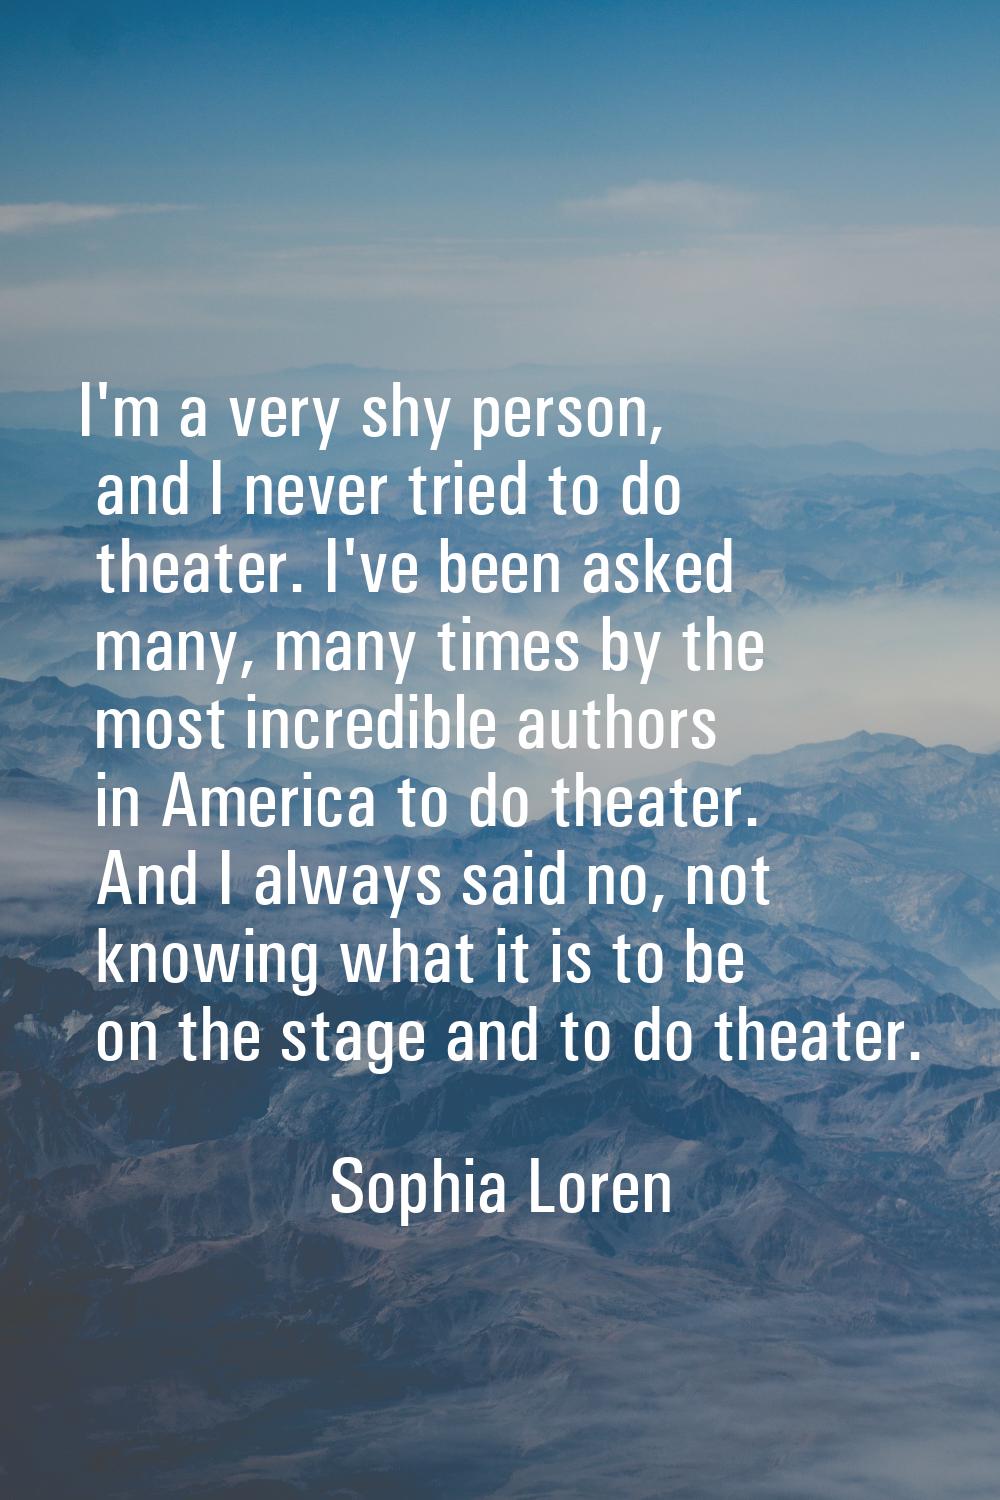 I'm a very shy person, and I never tried to do theater. I've been asked many, many times by the mos